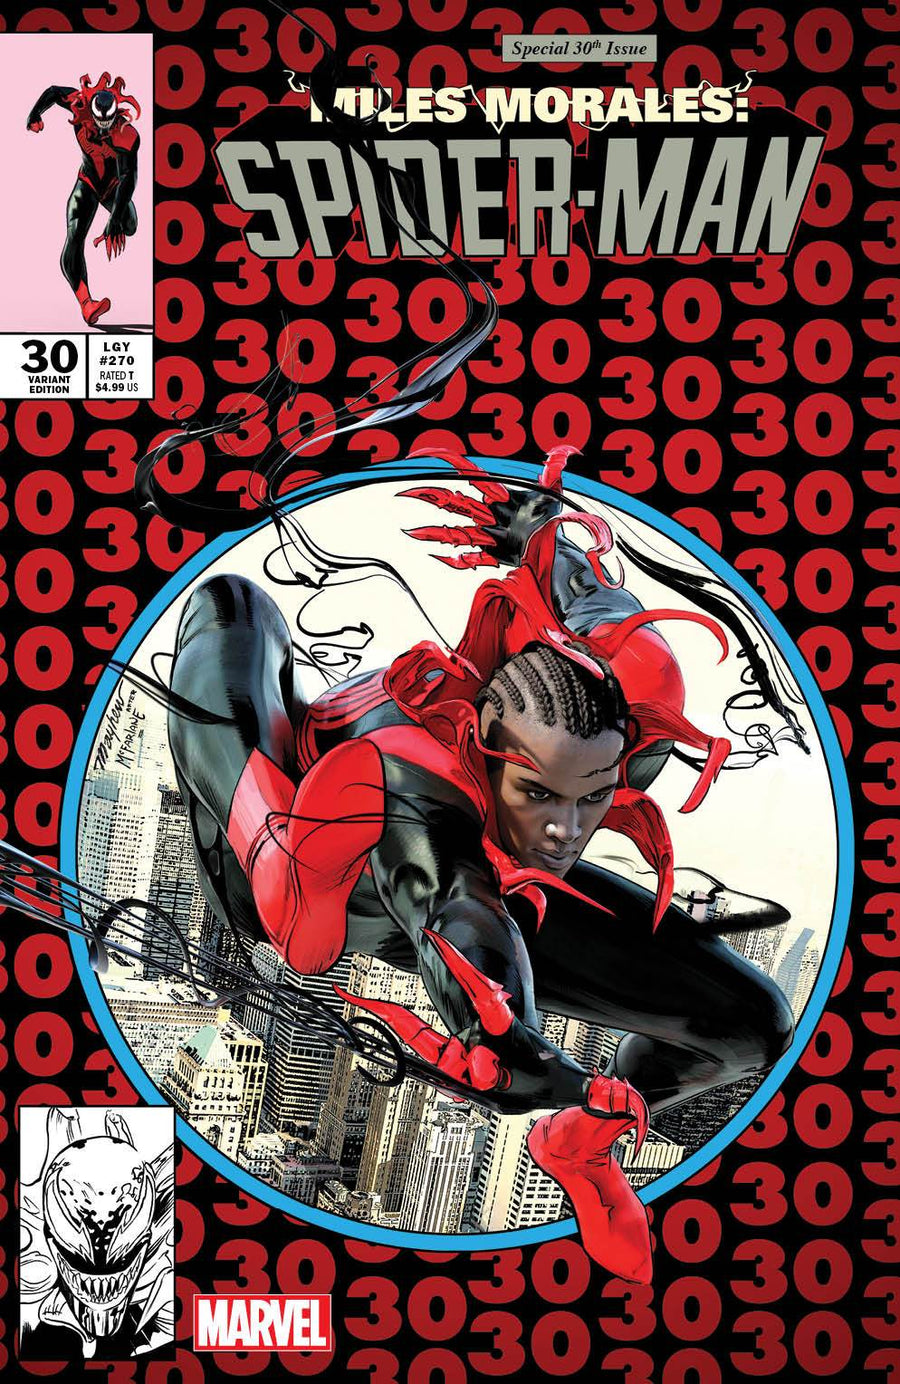 MILES MORALES SPIDER-MAN #30 MIKE MAYHEW STUDIO VARIANT COVER A TRADE DRESS RAW